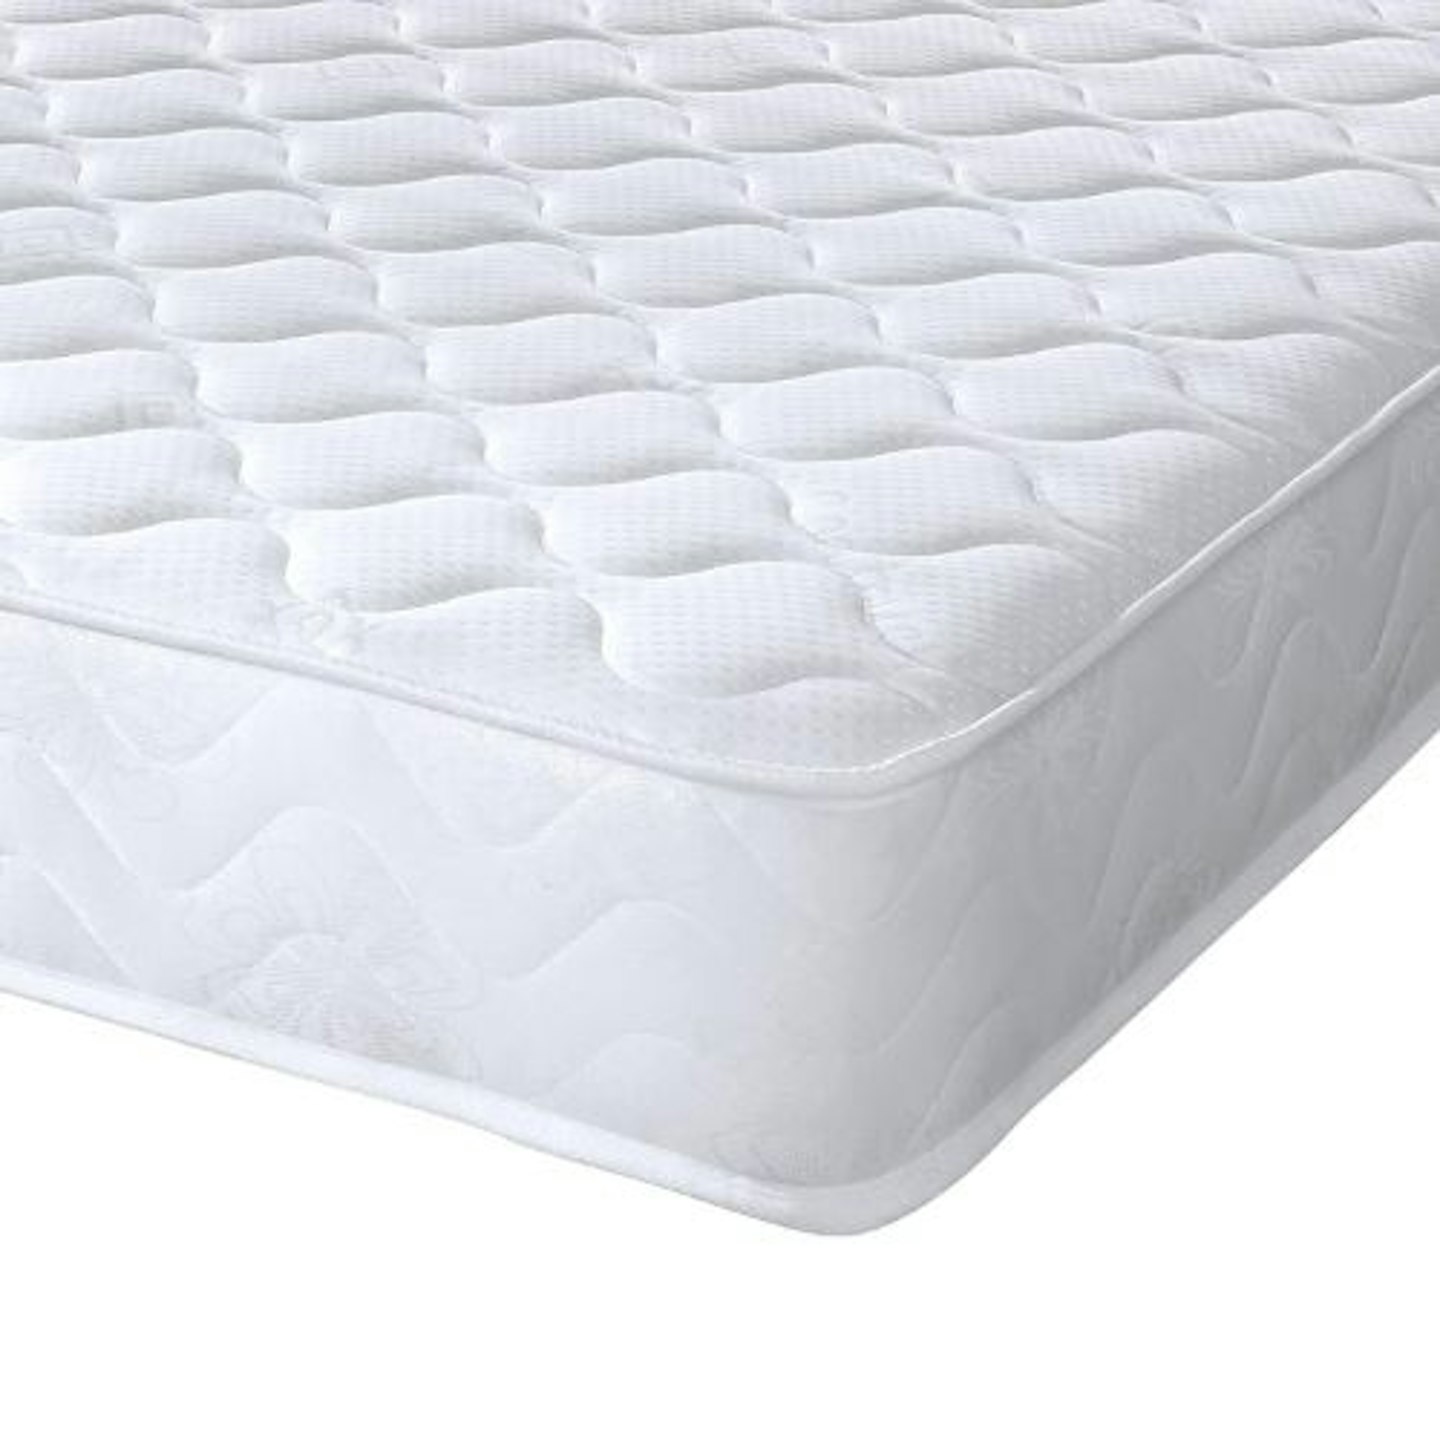  eXtreme comfort ltd - The Cooltouch Essentials White 18cms Deep Spring Value Mattress